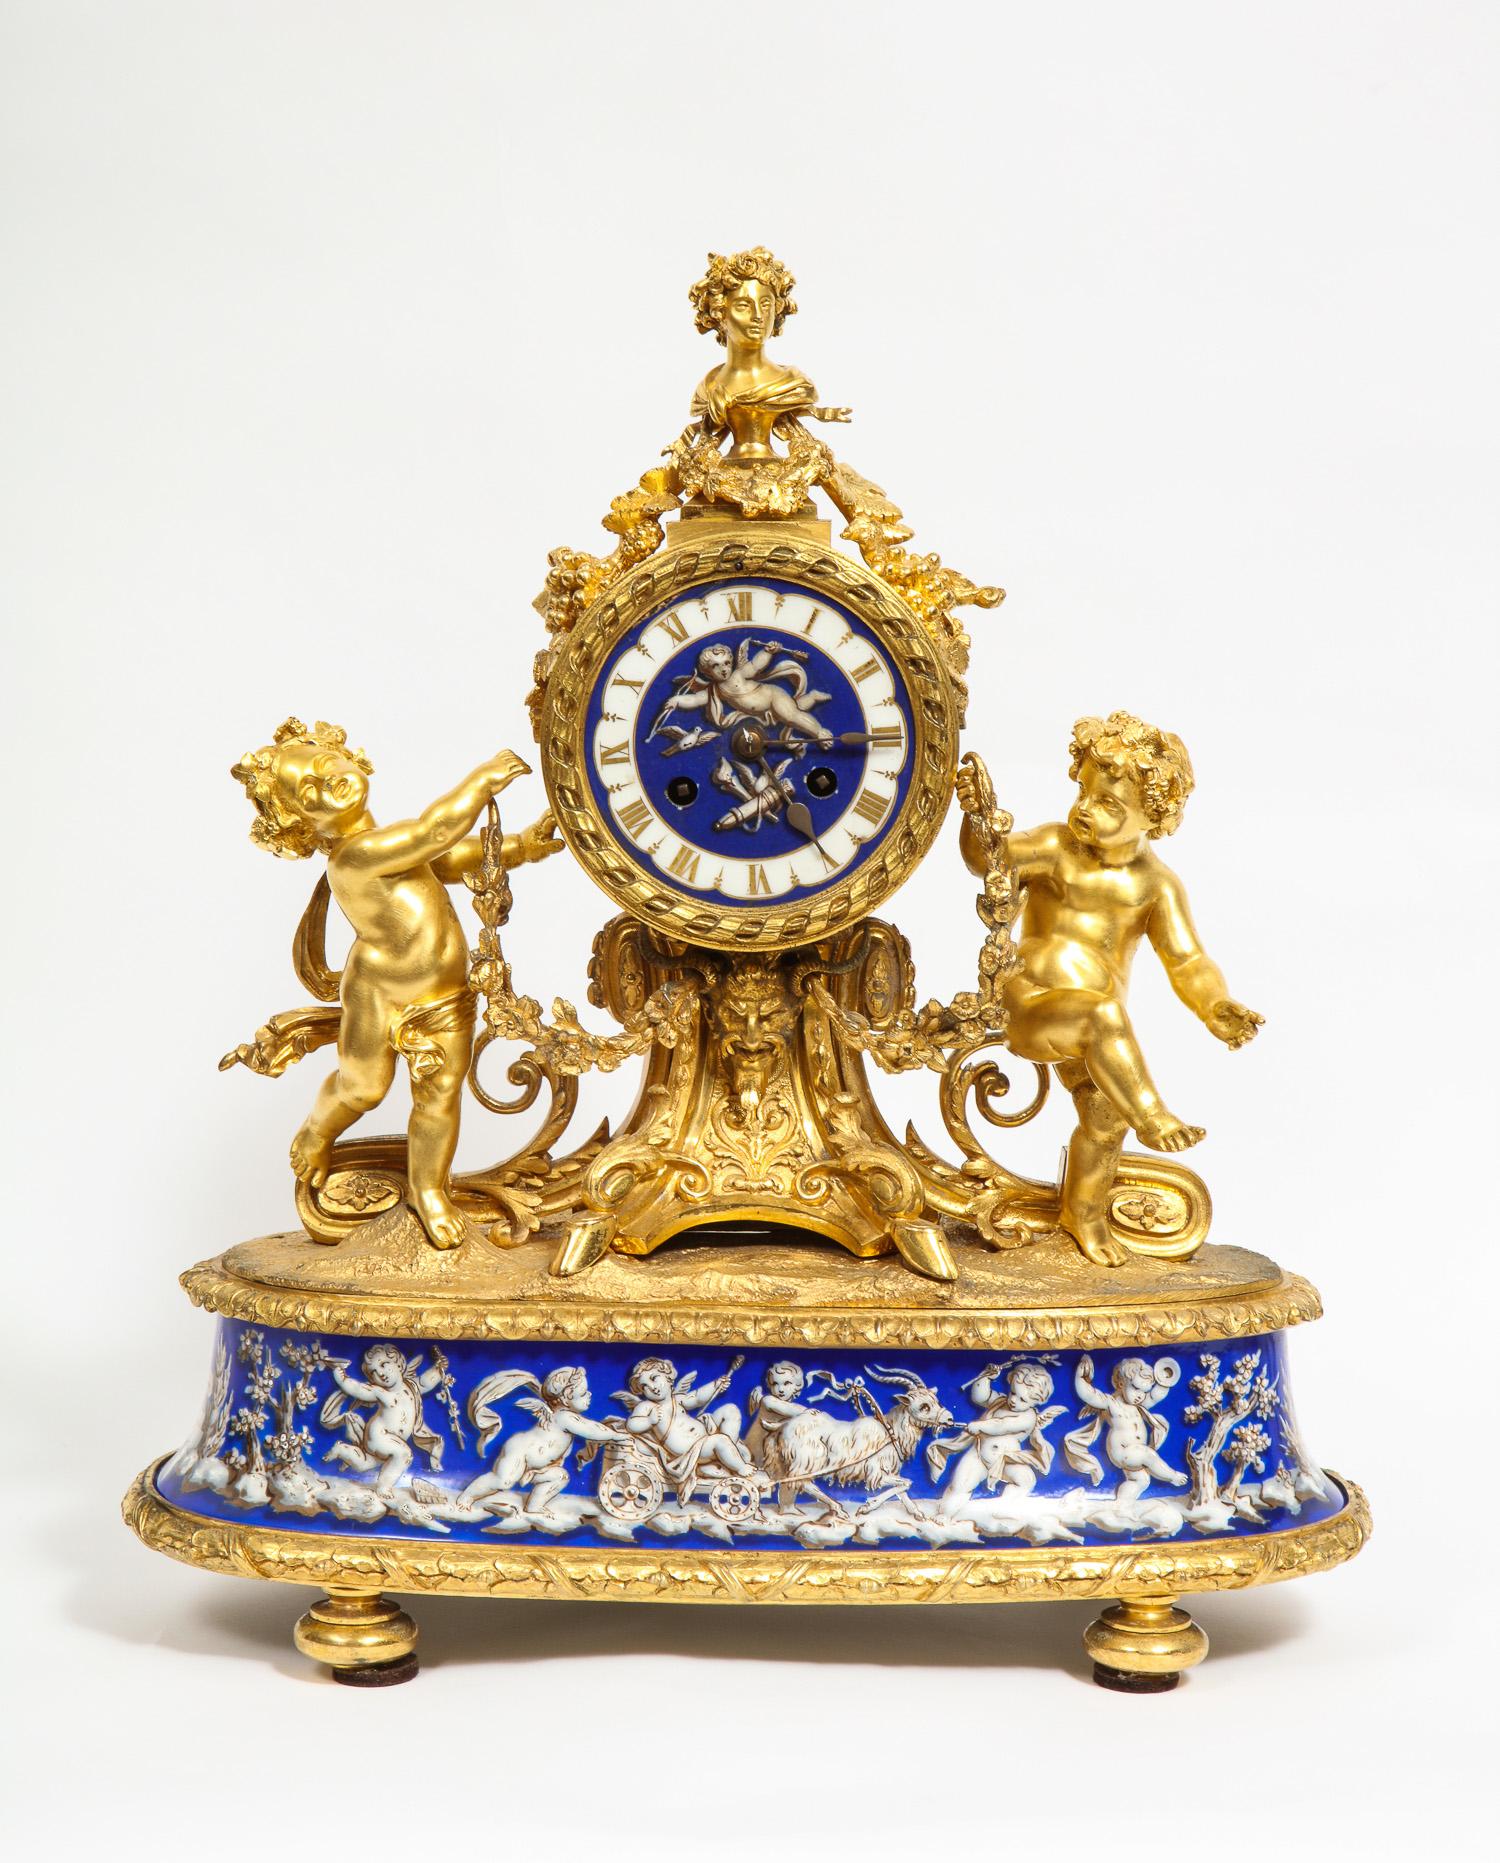 Napoleon III Exquisite French Ormolu Bronze and Blue Porcelain Mounted Three-Piece Clock Set